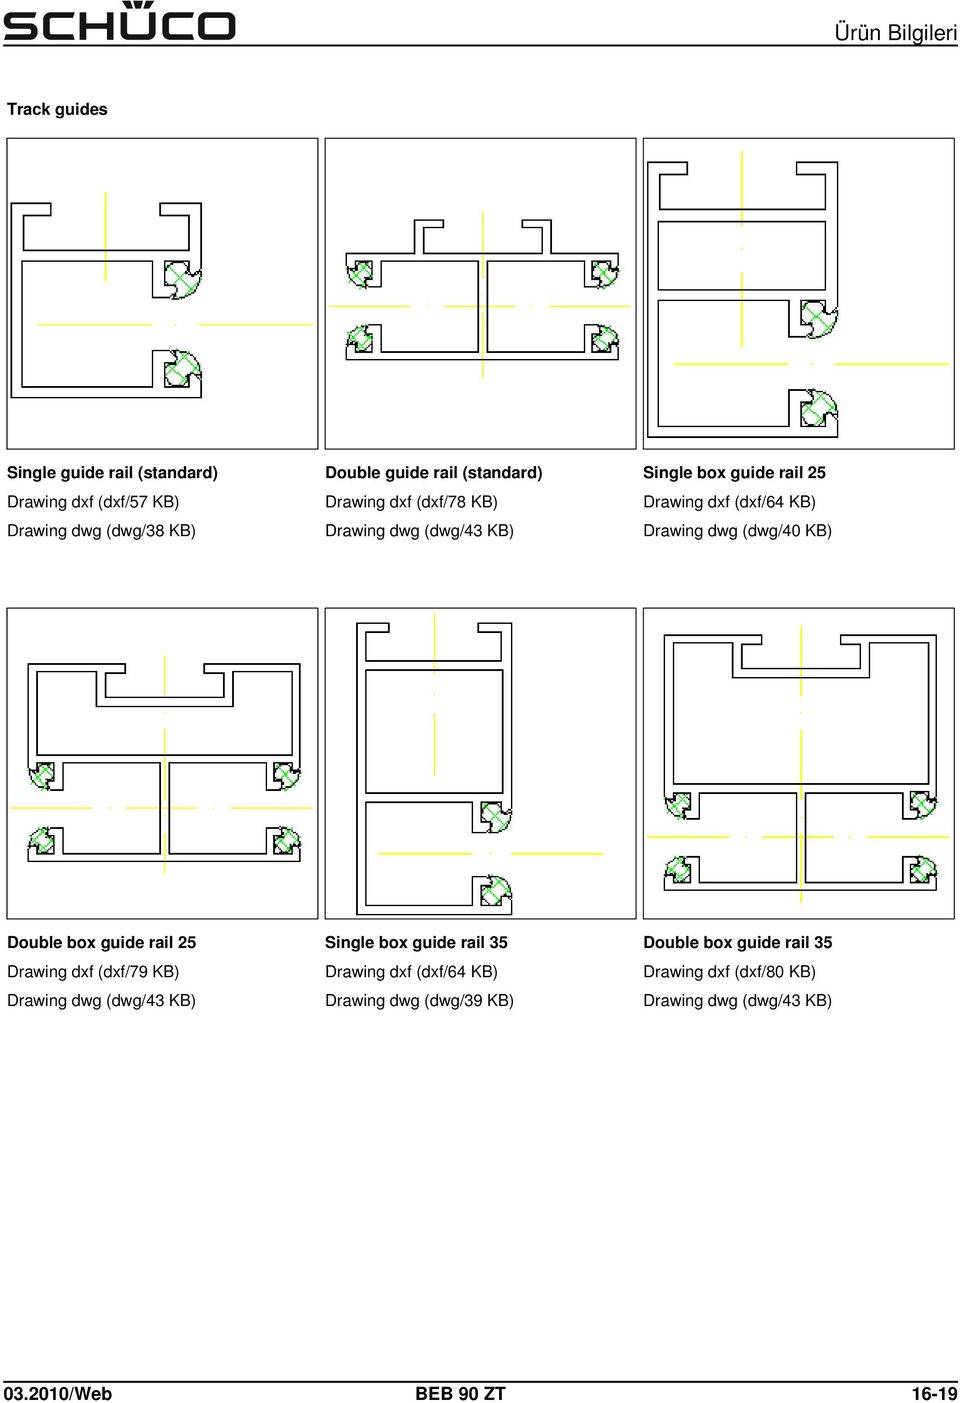 Double box guide rail 25 Drawing dxf (dxf/79 KB) Drawing dwg (dwg/43 KB) Single box guide rail 35 Drawing dxf (dxf/64 KB)